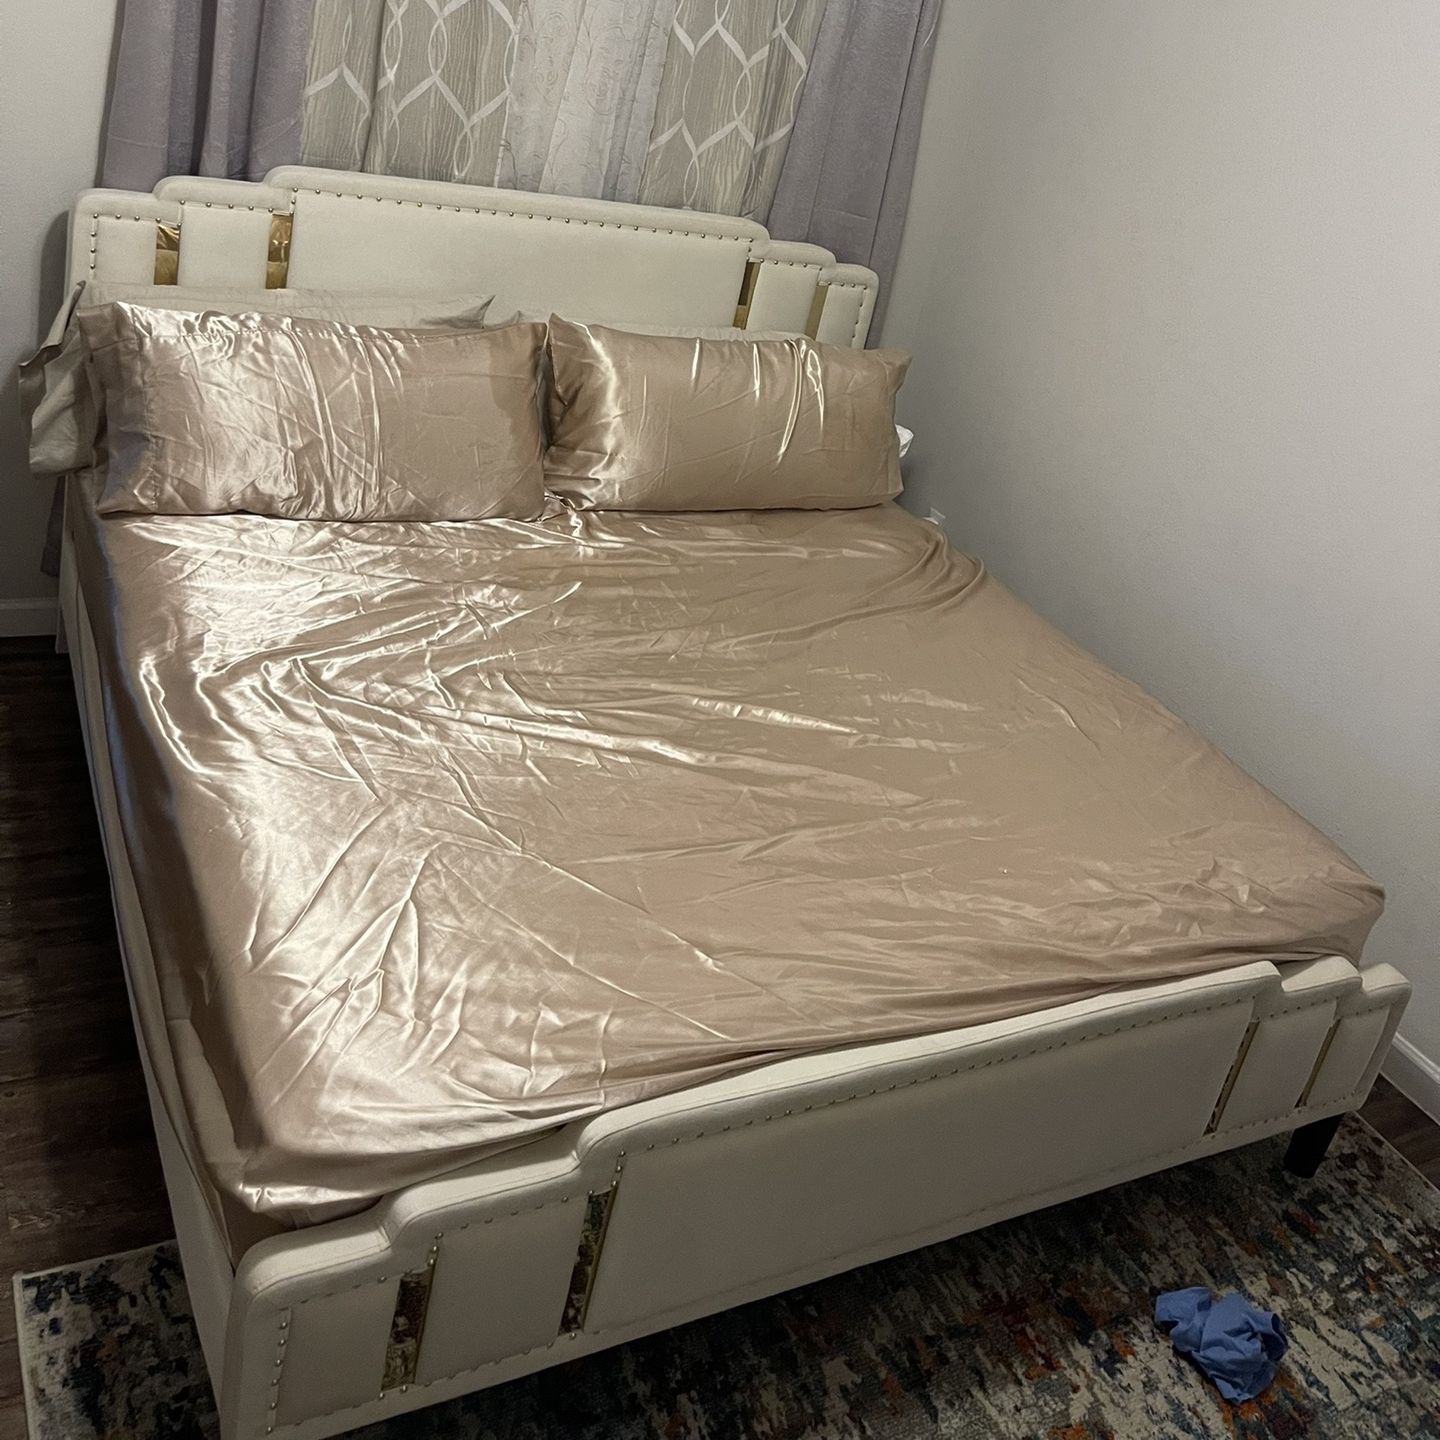 King Size Bed 